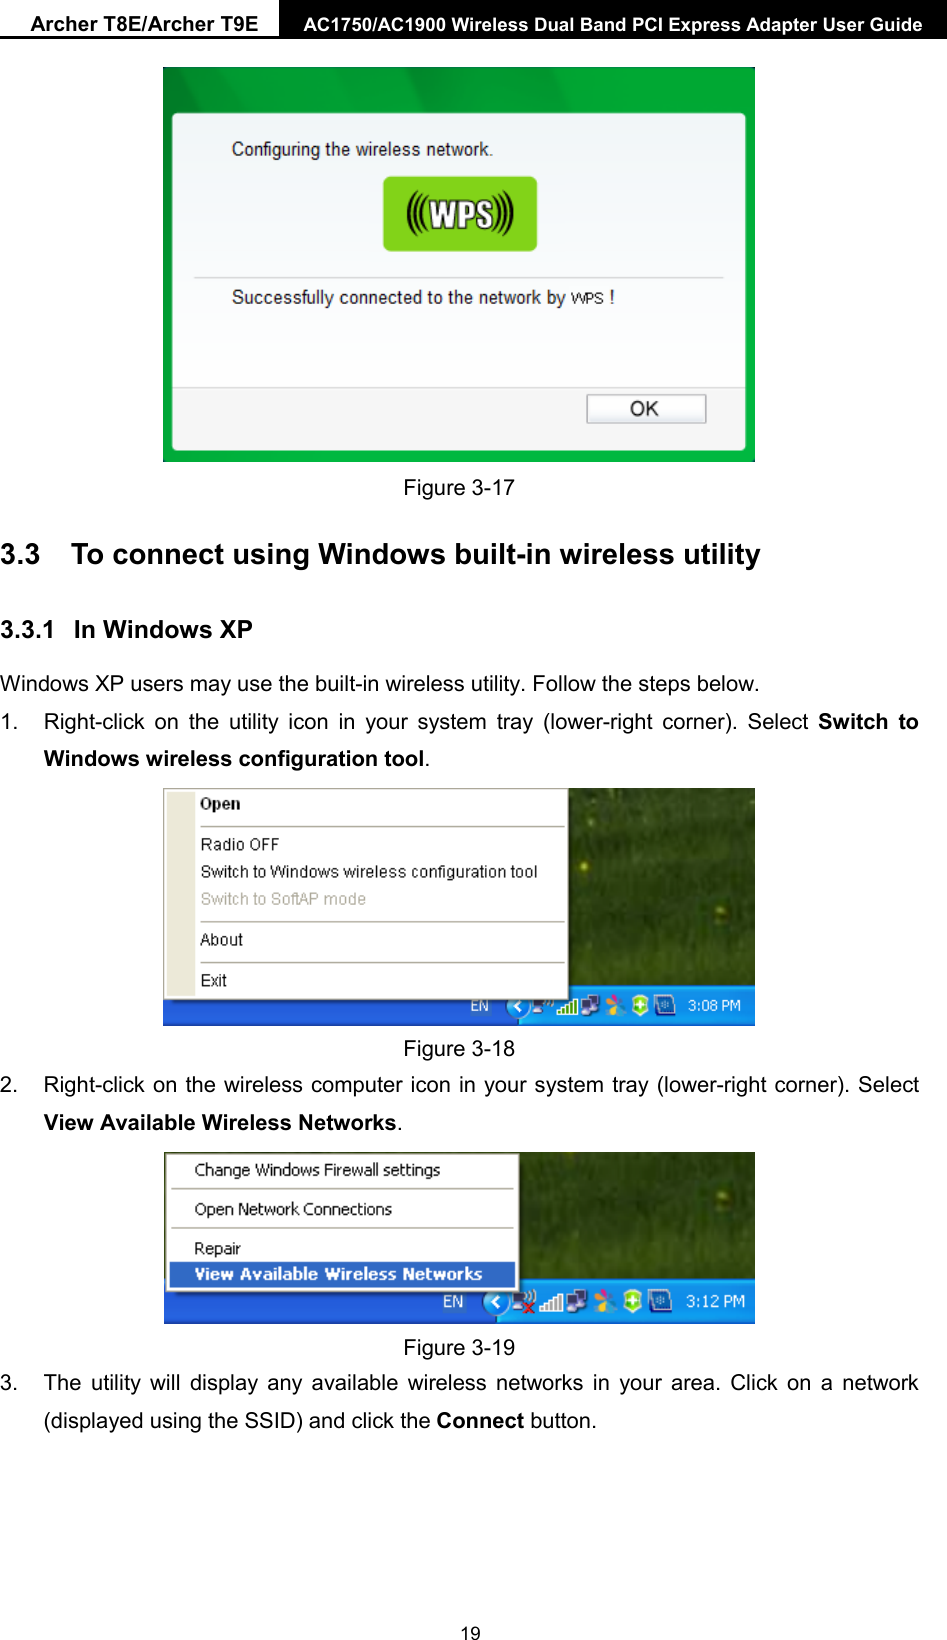 Archer T8E/Archer T9E AC1750/AC1900 Wireless Dual Band PCI Express Adapter User Guide   Figure 3-17 3.3 To connect using Windows built-in wireless utility 3.3.1 In Windows XP Windows XP users may use the built-in wireless utility. Follow the steps below. 1. Right-click on the utility icon in your system tray (lower-right corner). Select  Switch to Windows wireless configuration tool.    Figure 3-18 2. Right-click on the wireless computer icon in your system tray (lower-right corner). Select View Available Wireless Networks.  Figure 3-19 3. The utility will display any available wireless networks in your area. Click on a network (displayed using the SSID) and click the Connect button.  19 